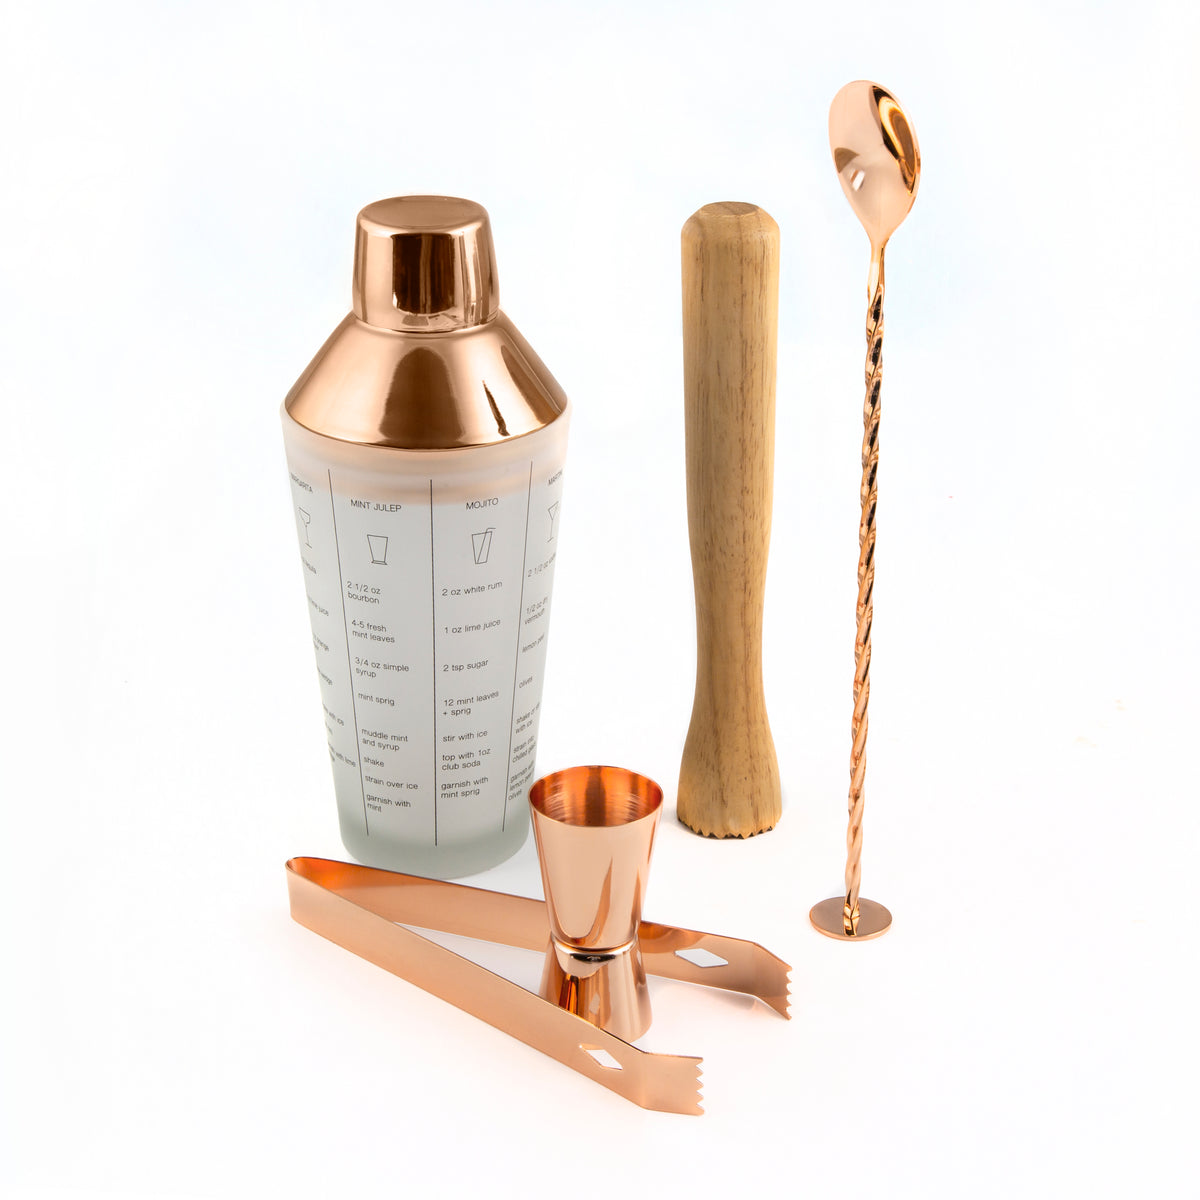 3 pc Copper Stainless Steel Martini Gift Set - 2 Large Martini